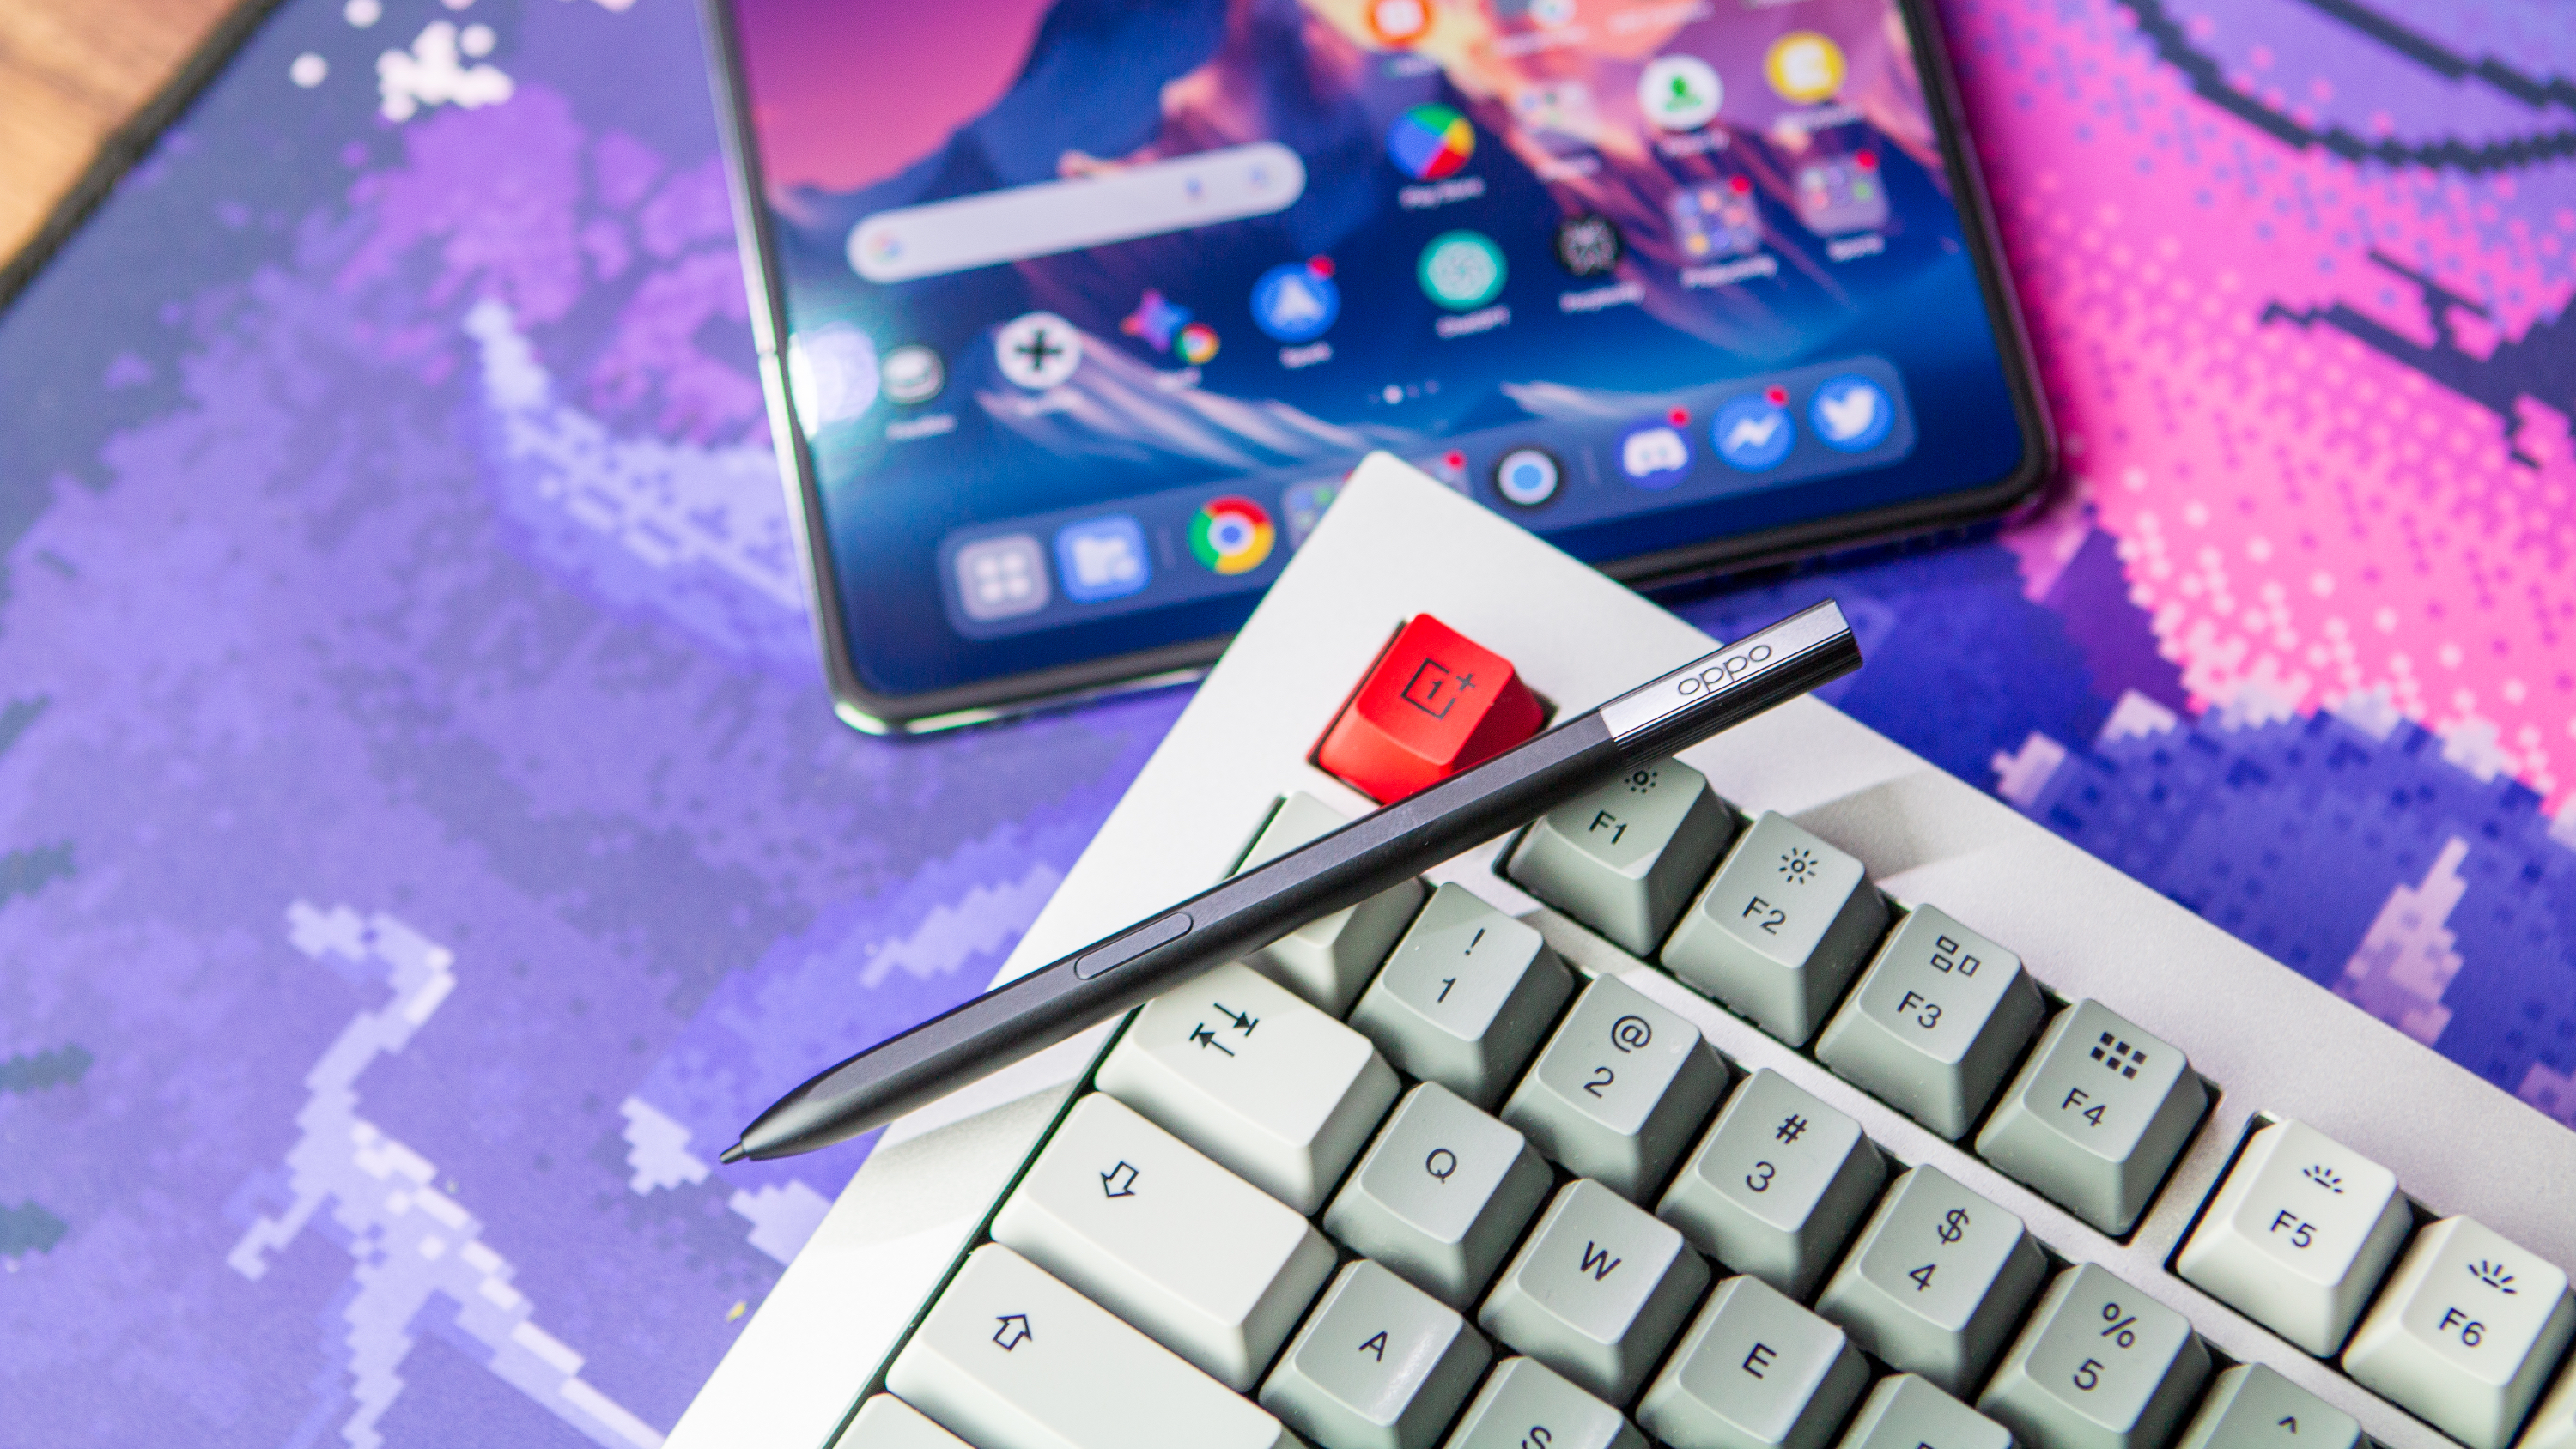 Oppo Pen on OnePlus Keyboard and OnePlus Open in the background